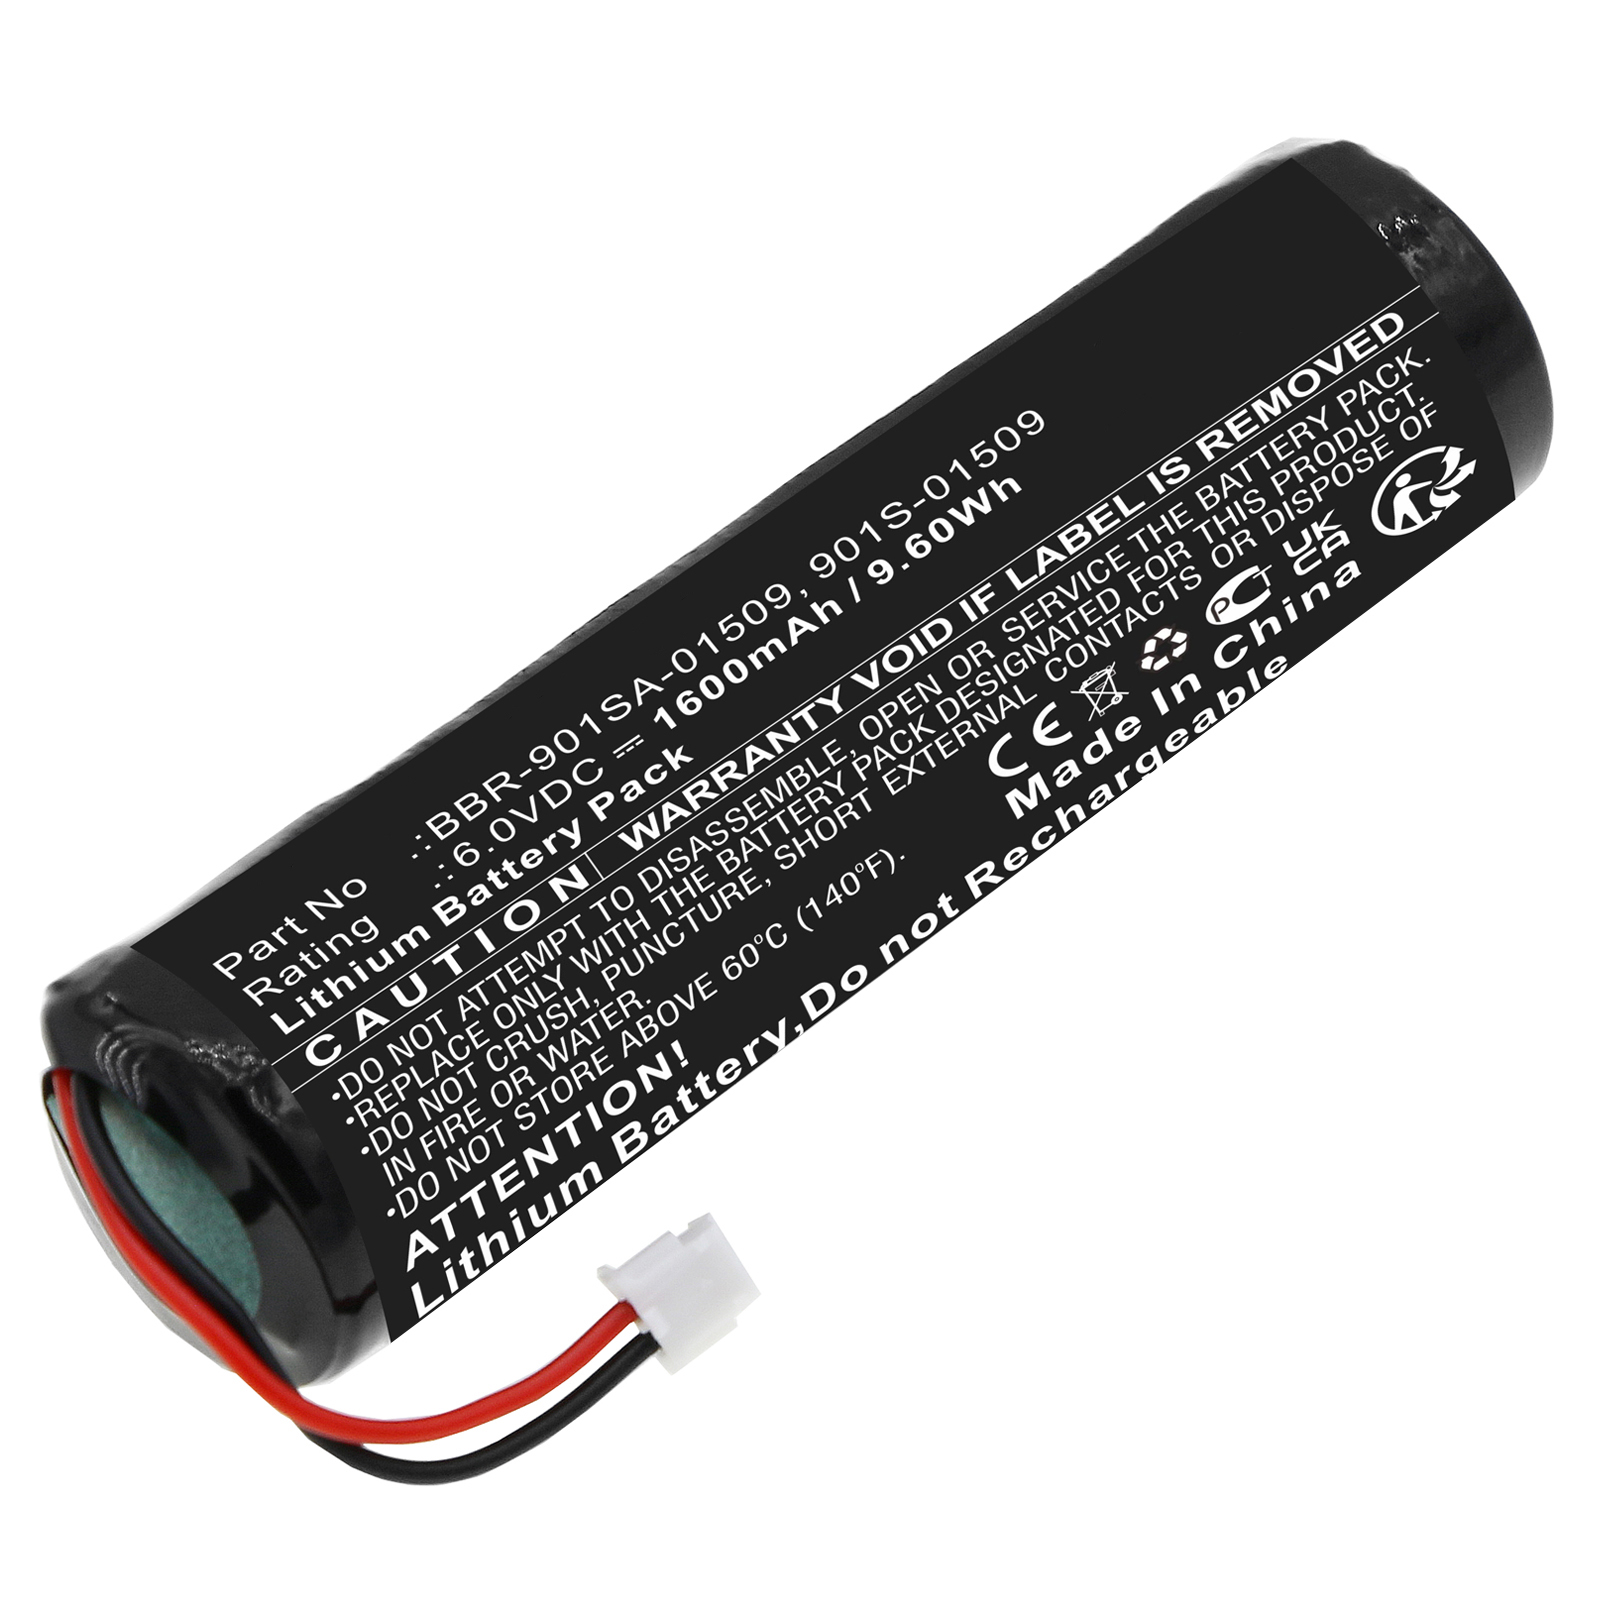 Synergy Digital Marine Safety & Flotation Devices Battery, Compatible with Ocean Signal 901S-01509 Marine Safety & Flotation Devices Battery (Li-MnO2, 6V, 1600mAh)